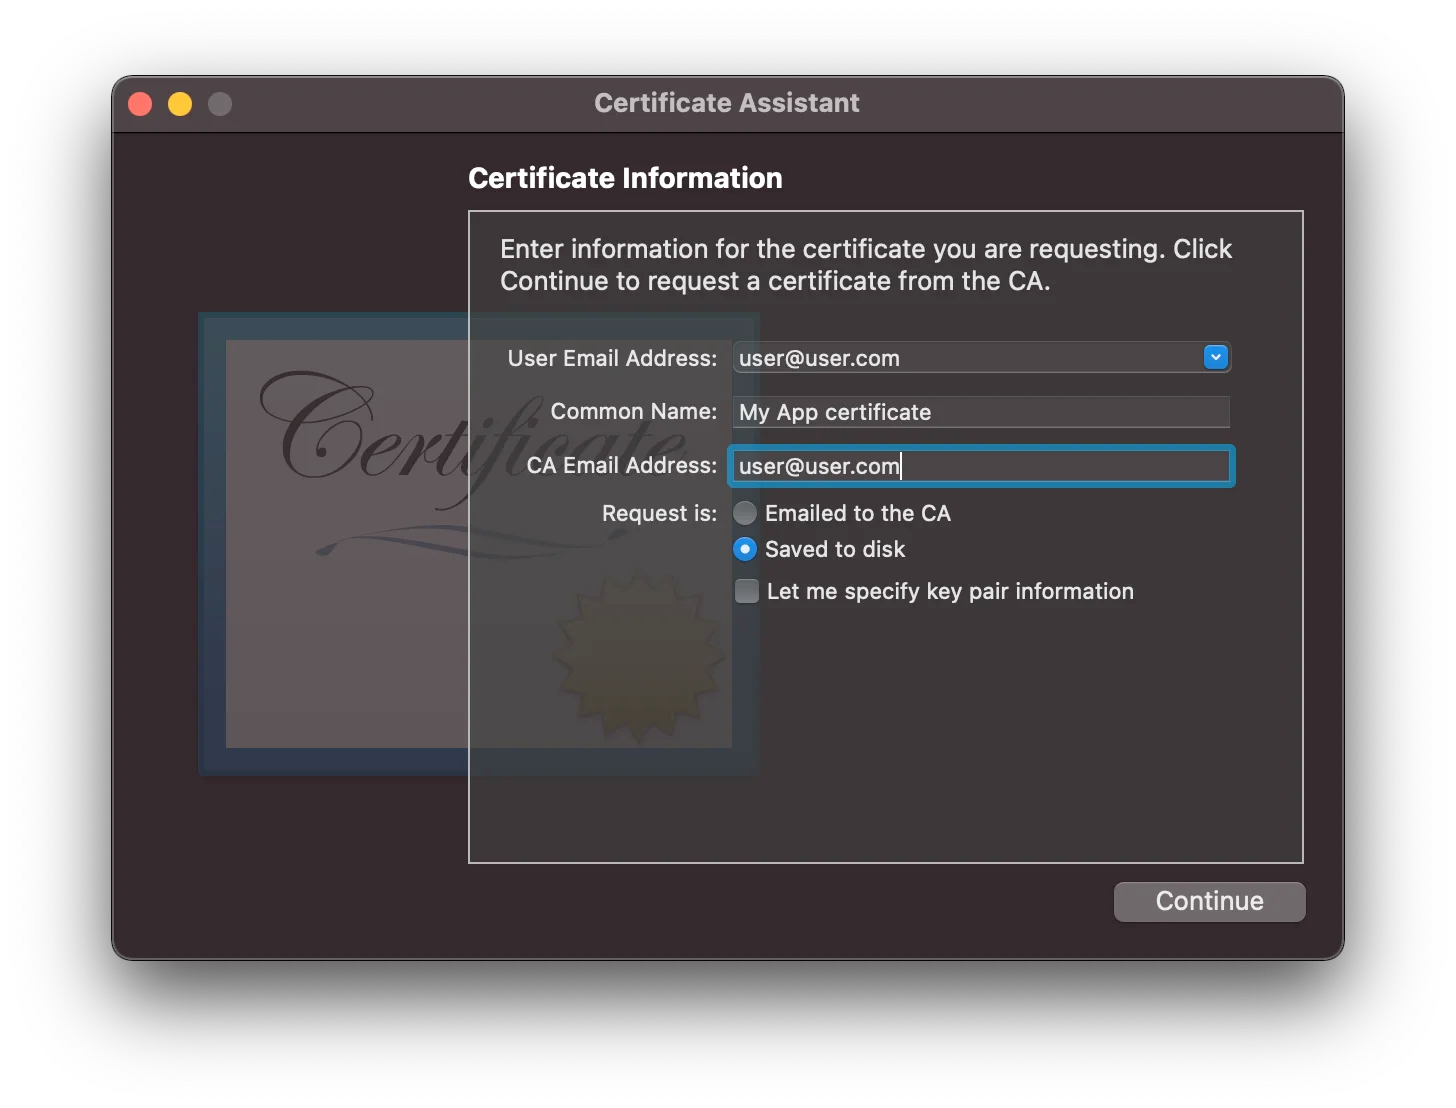 keychain-access-certificate-assistant.png